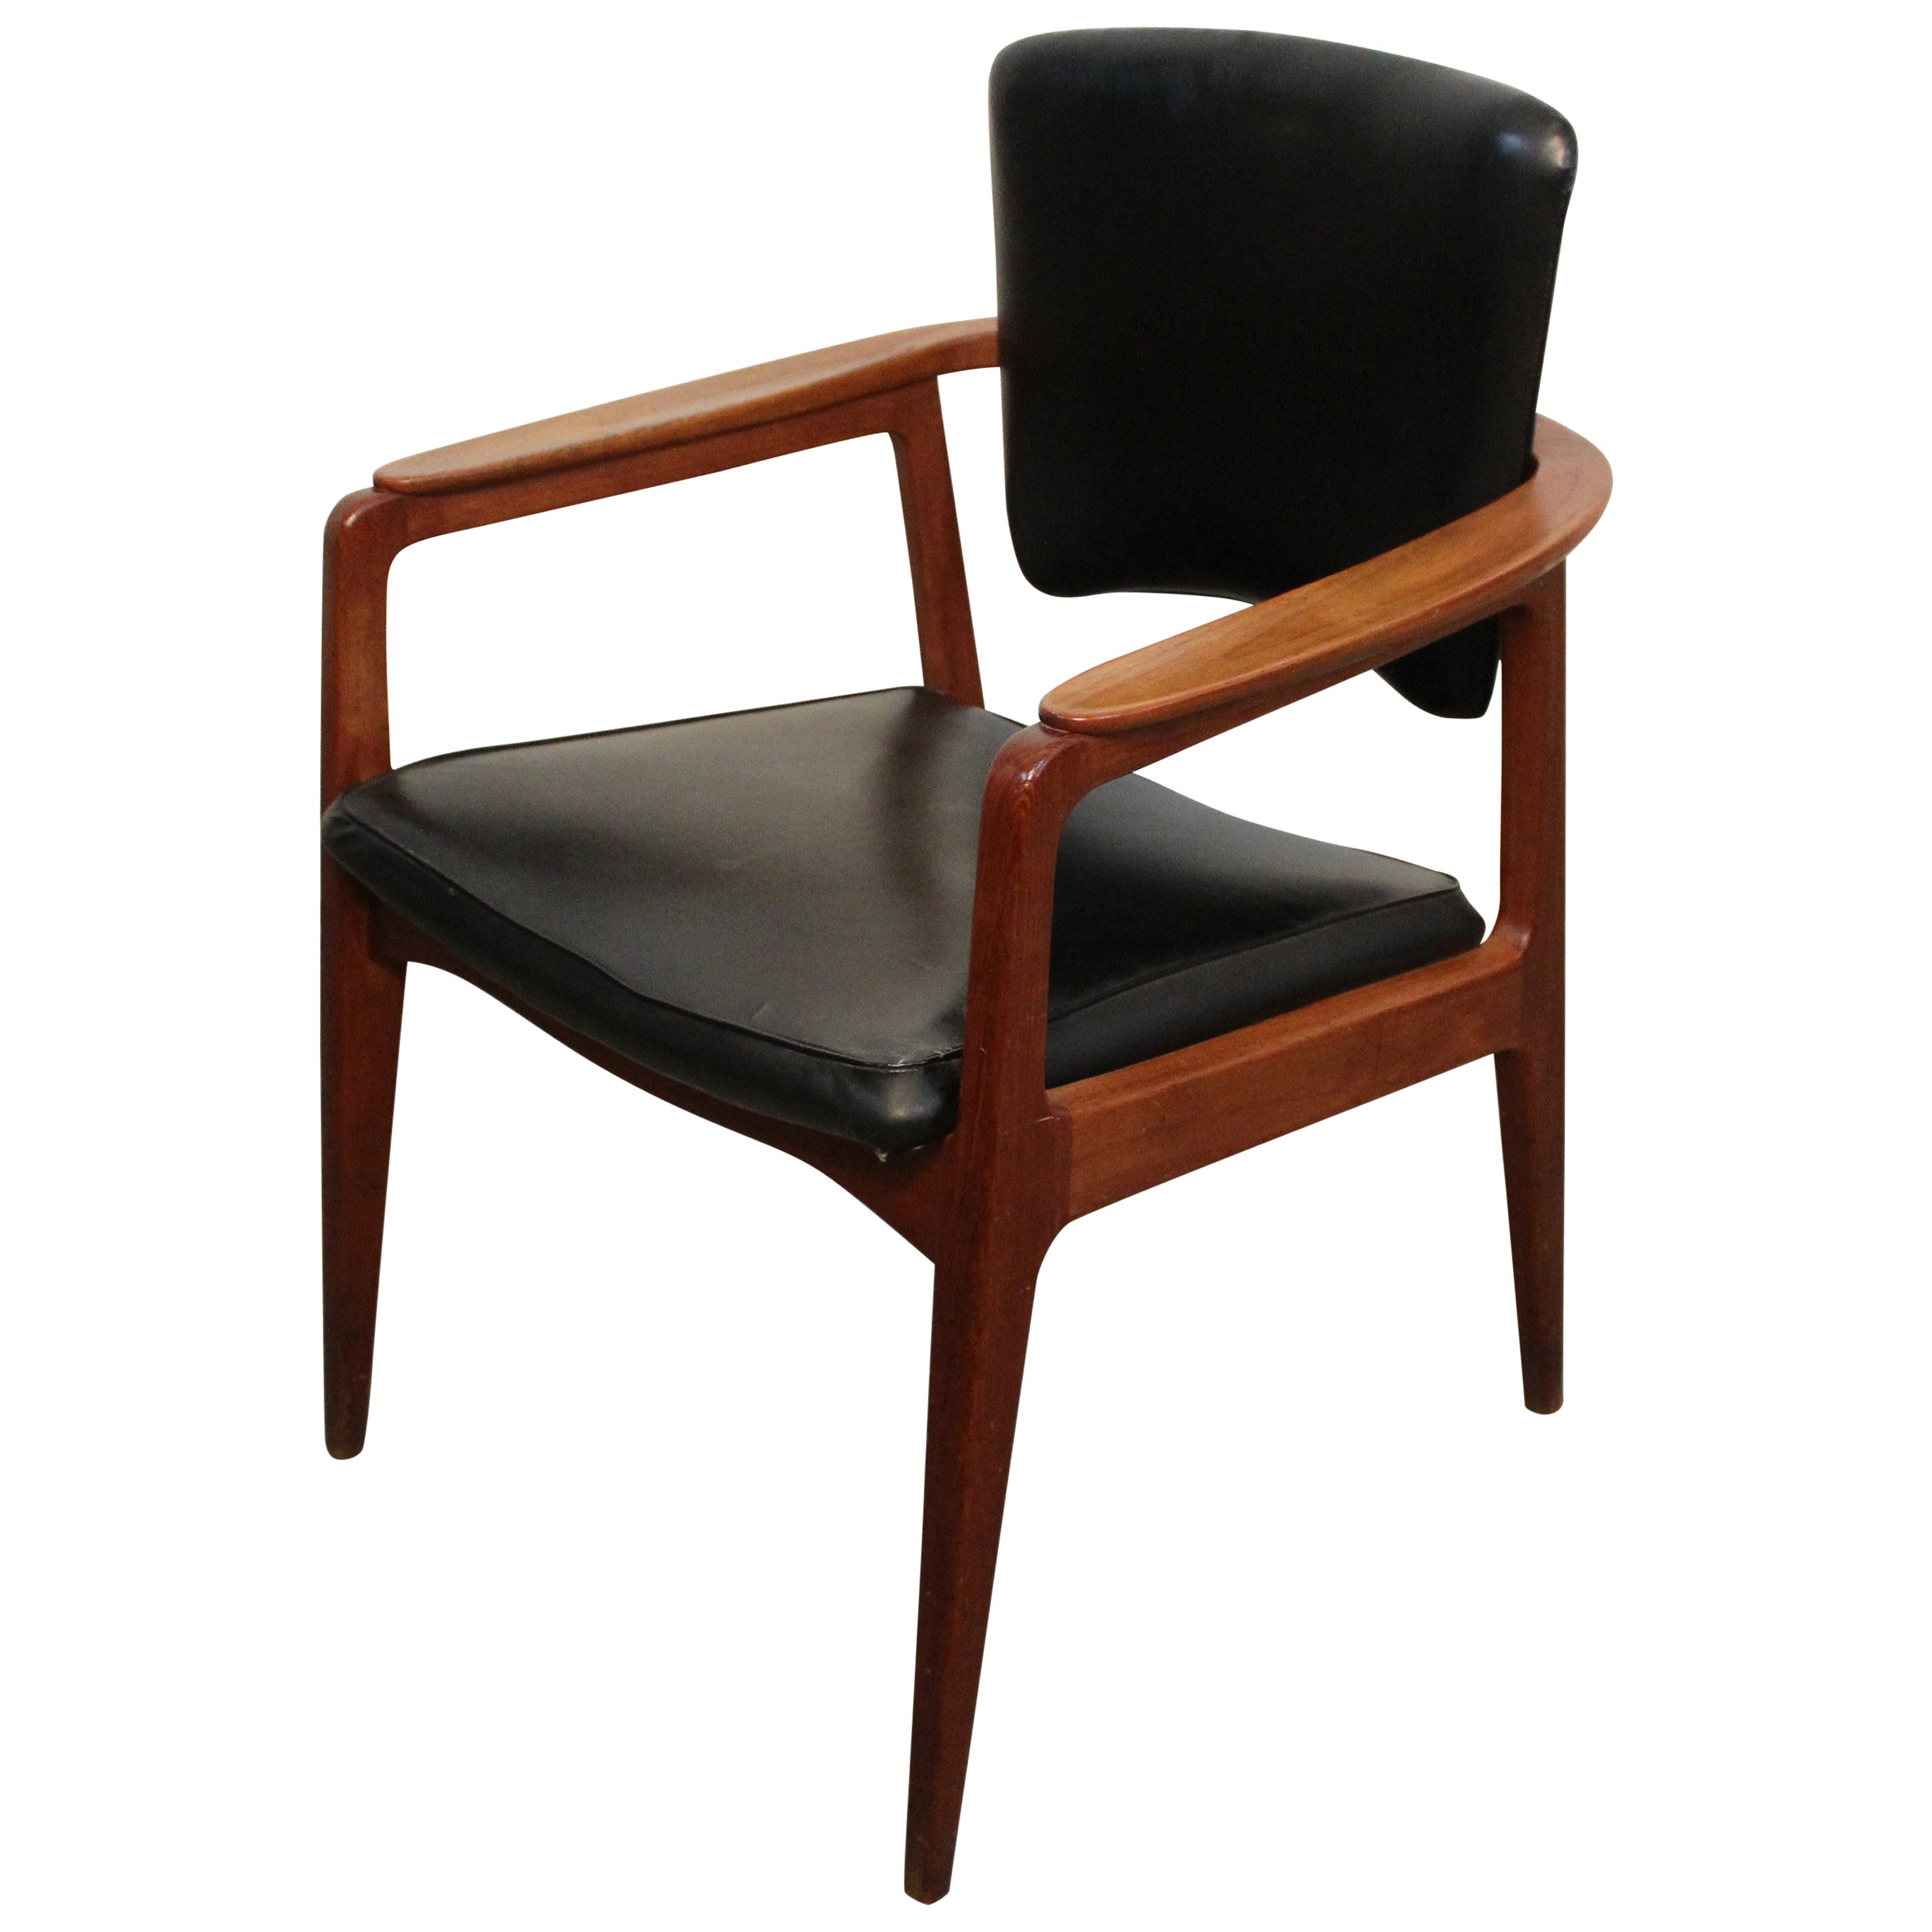 Reclining Captain's Chair by Sigvard Bernadotte for France & Son